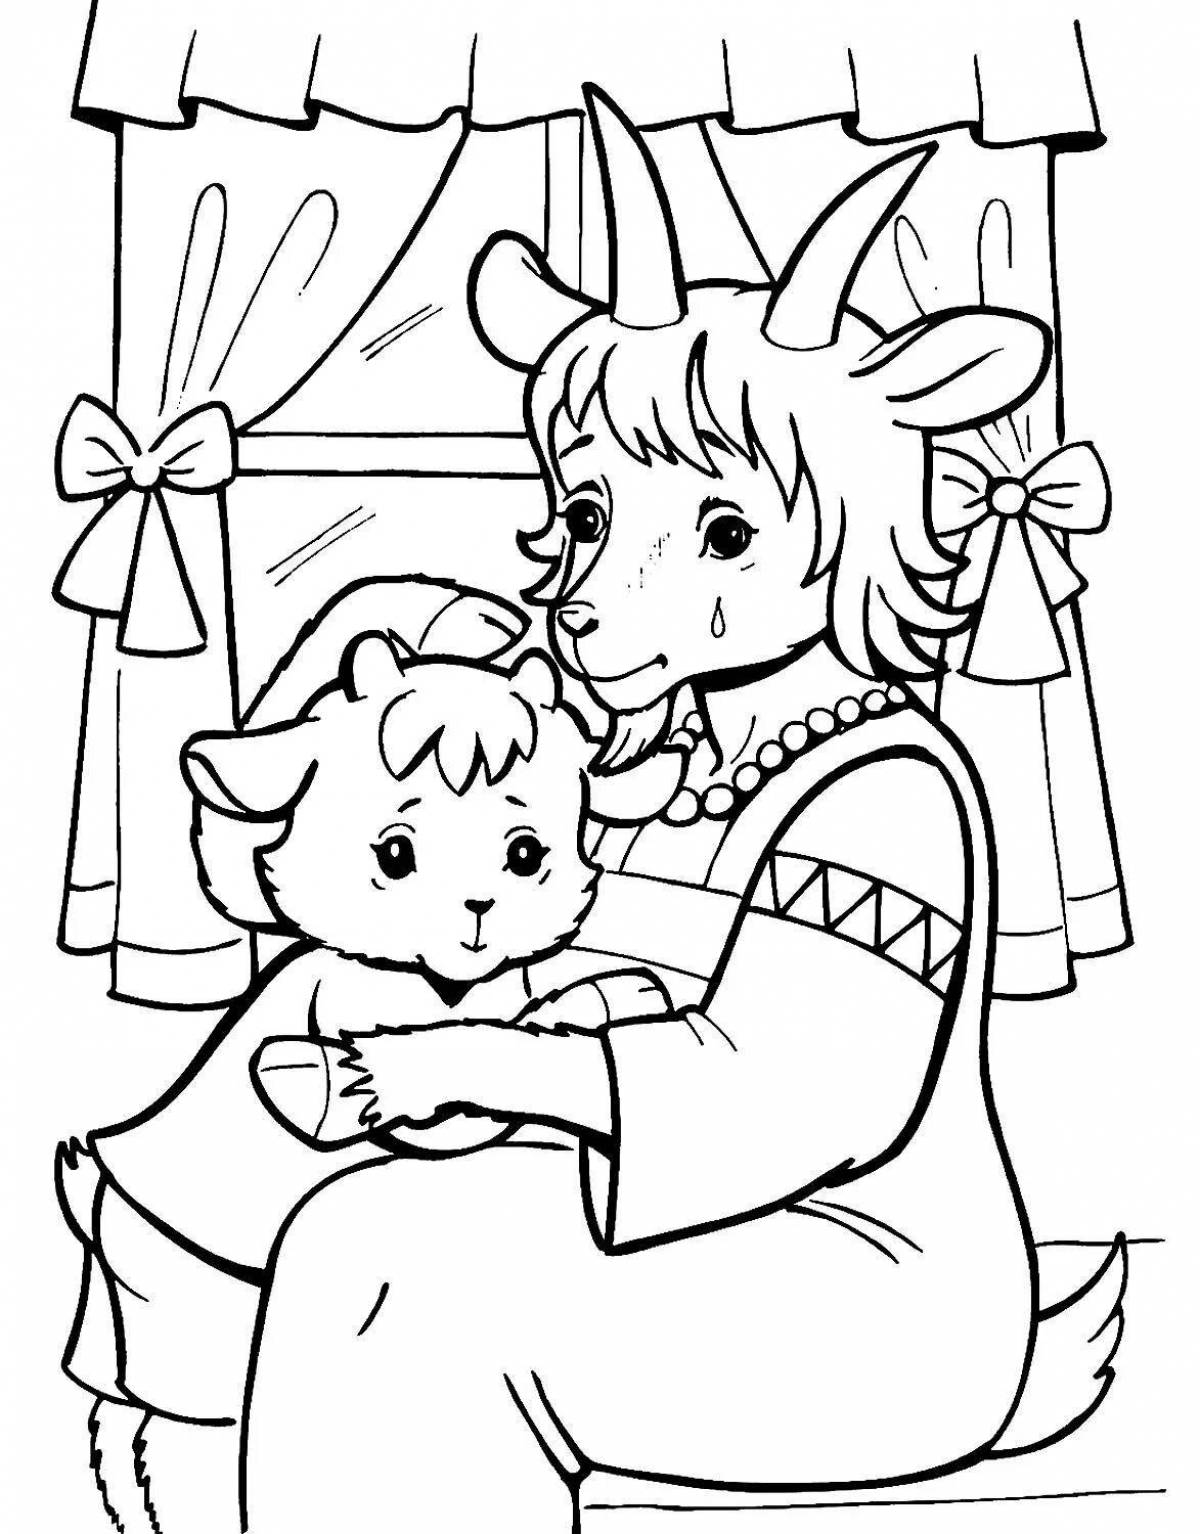 Coloring page 7 for children